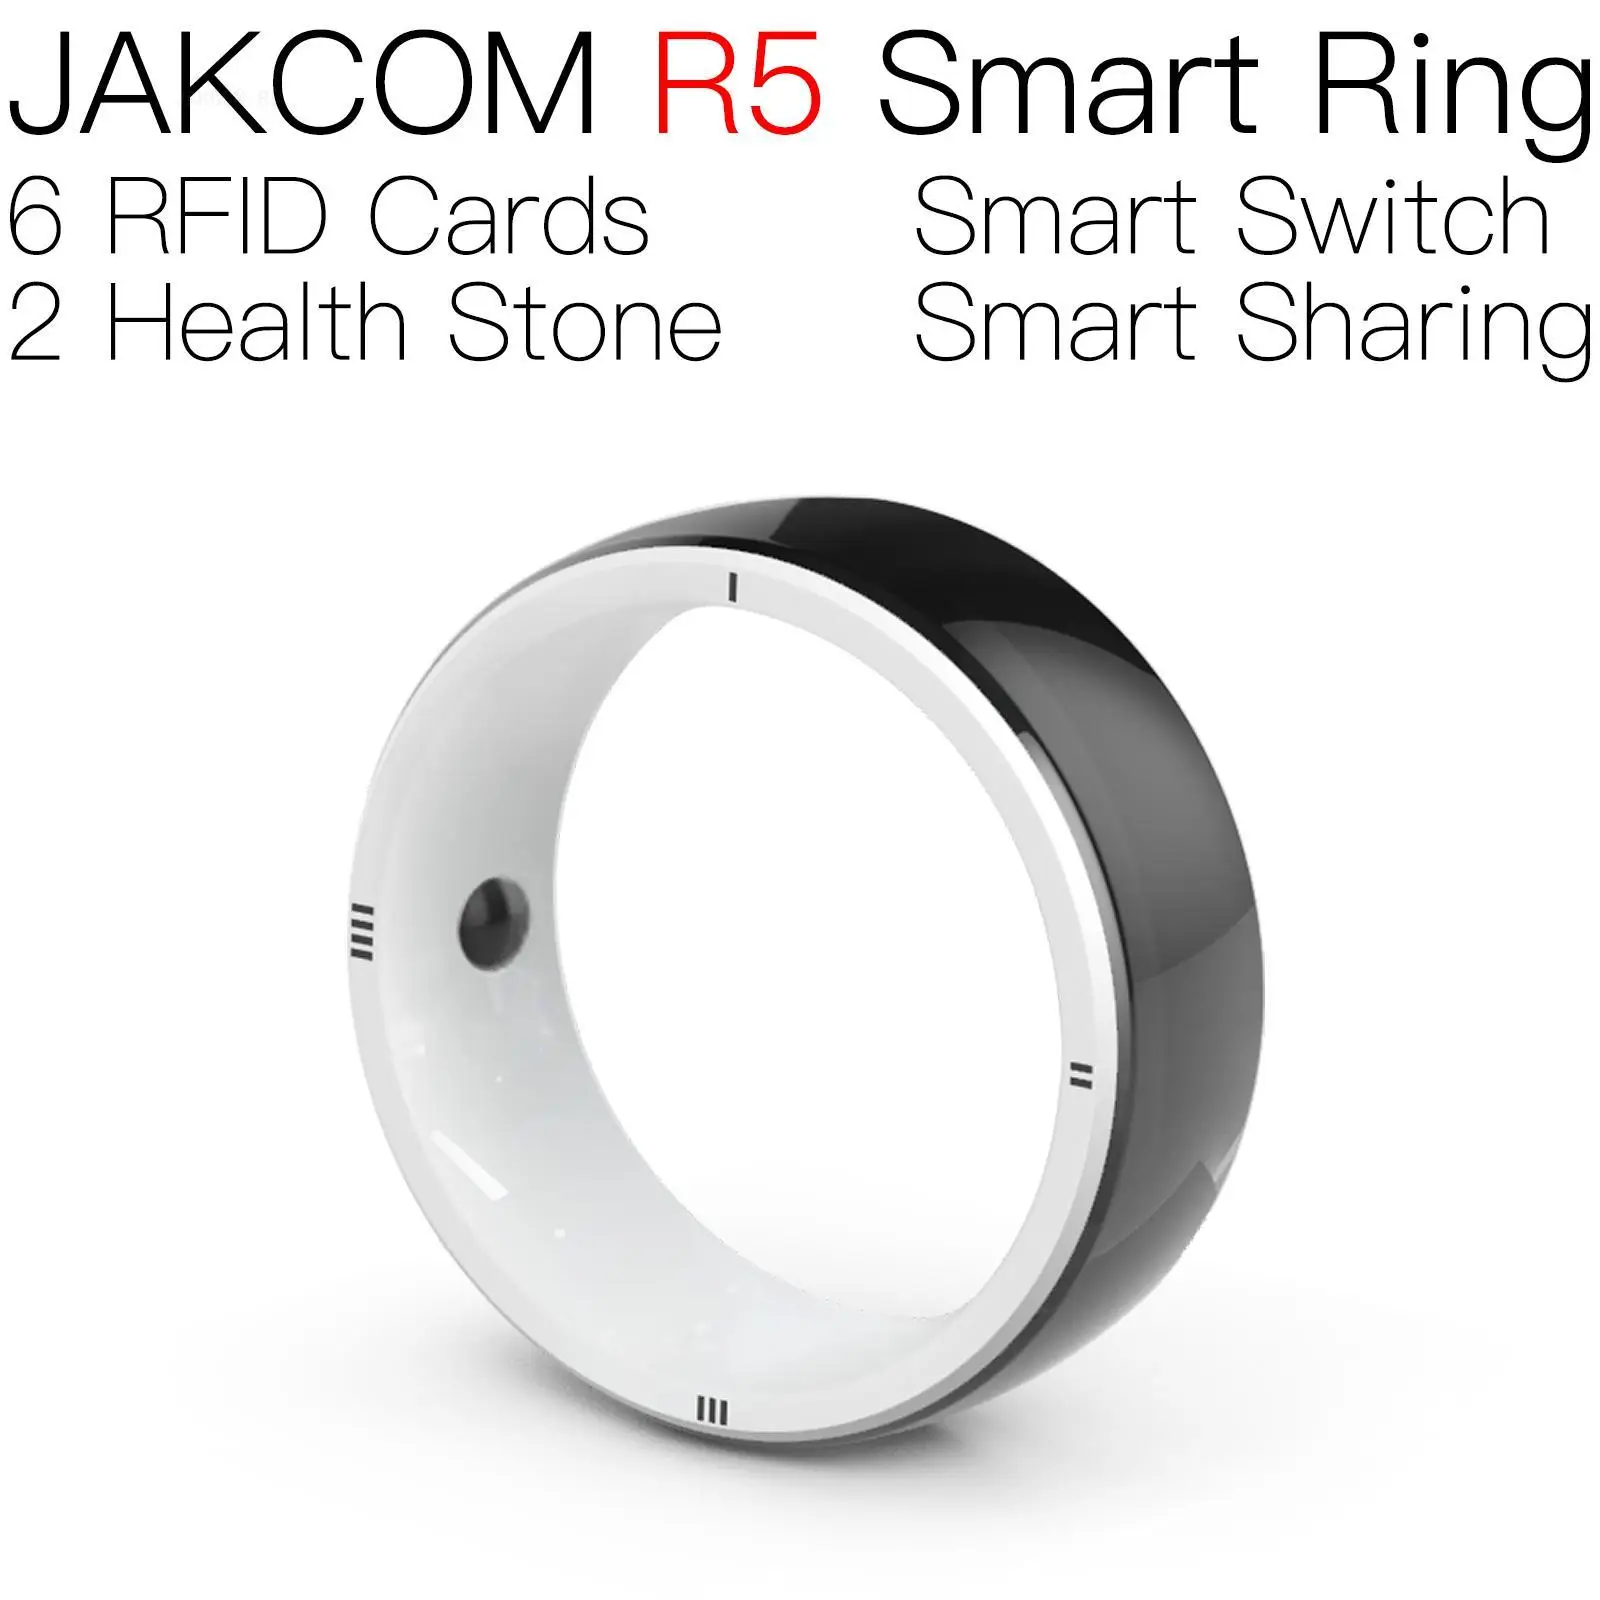 

JAKCOM R5 Smart Ring New arrival as yes card em marine rfid chip hf skimmers nfc ntag 215 black wet contactless pay tag